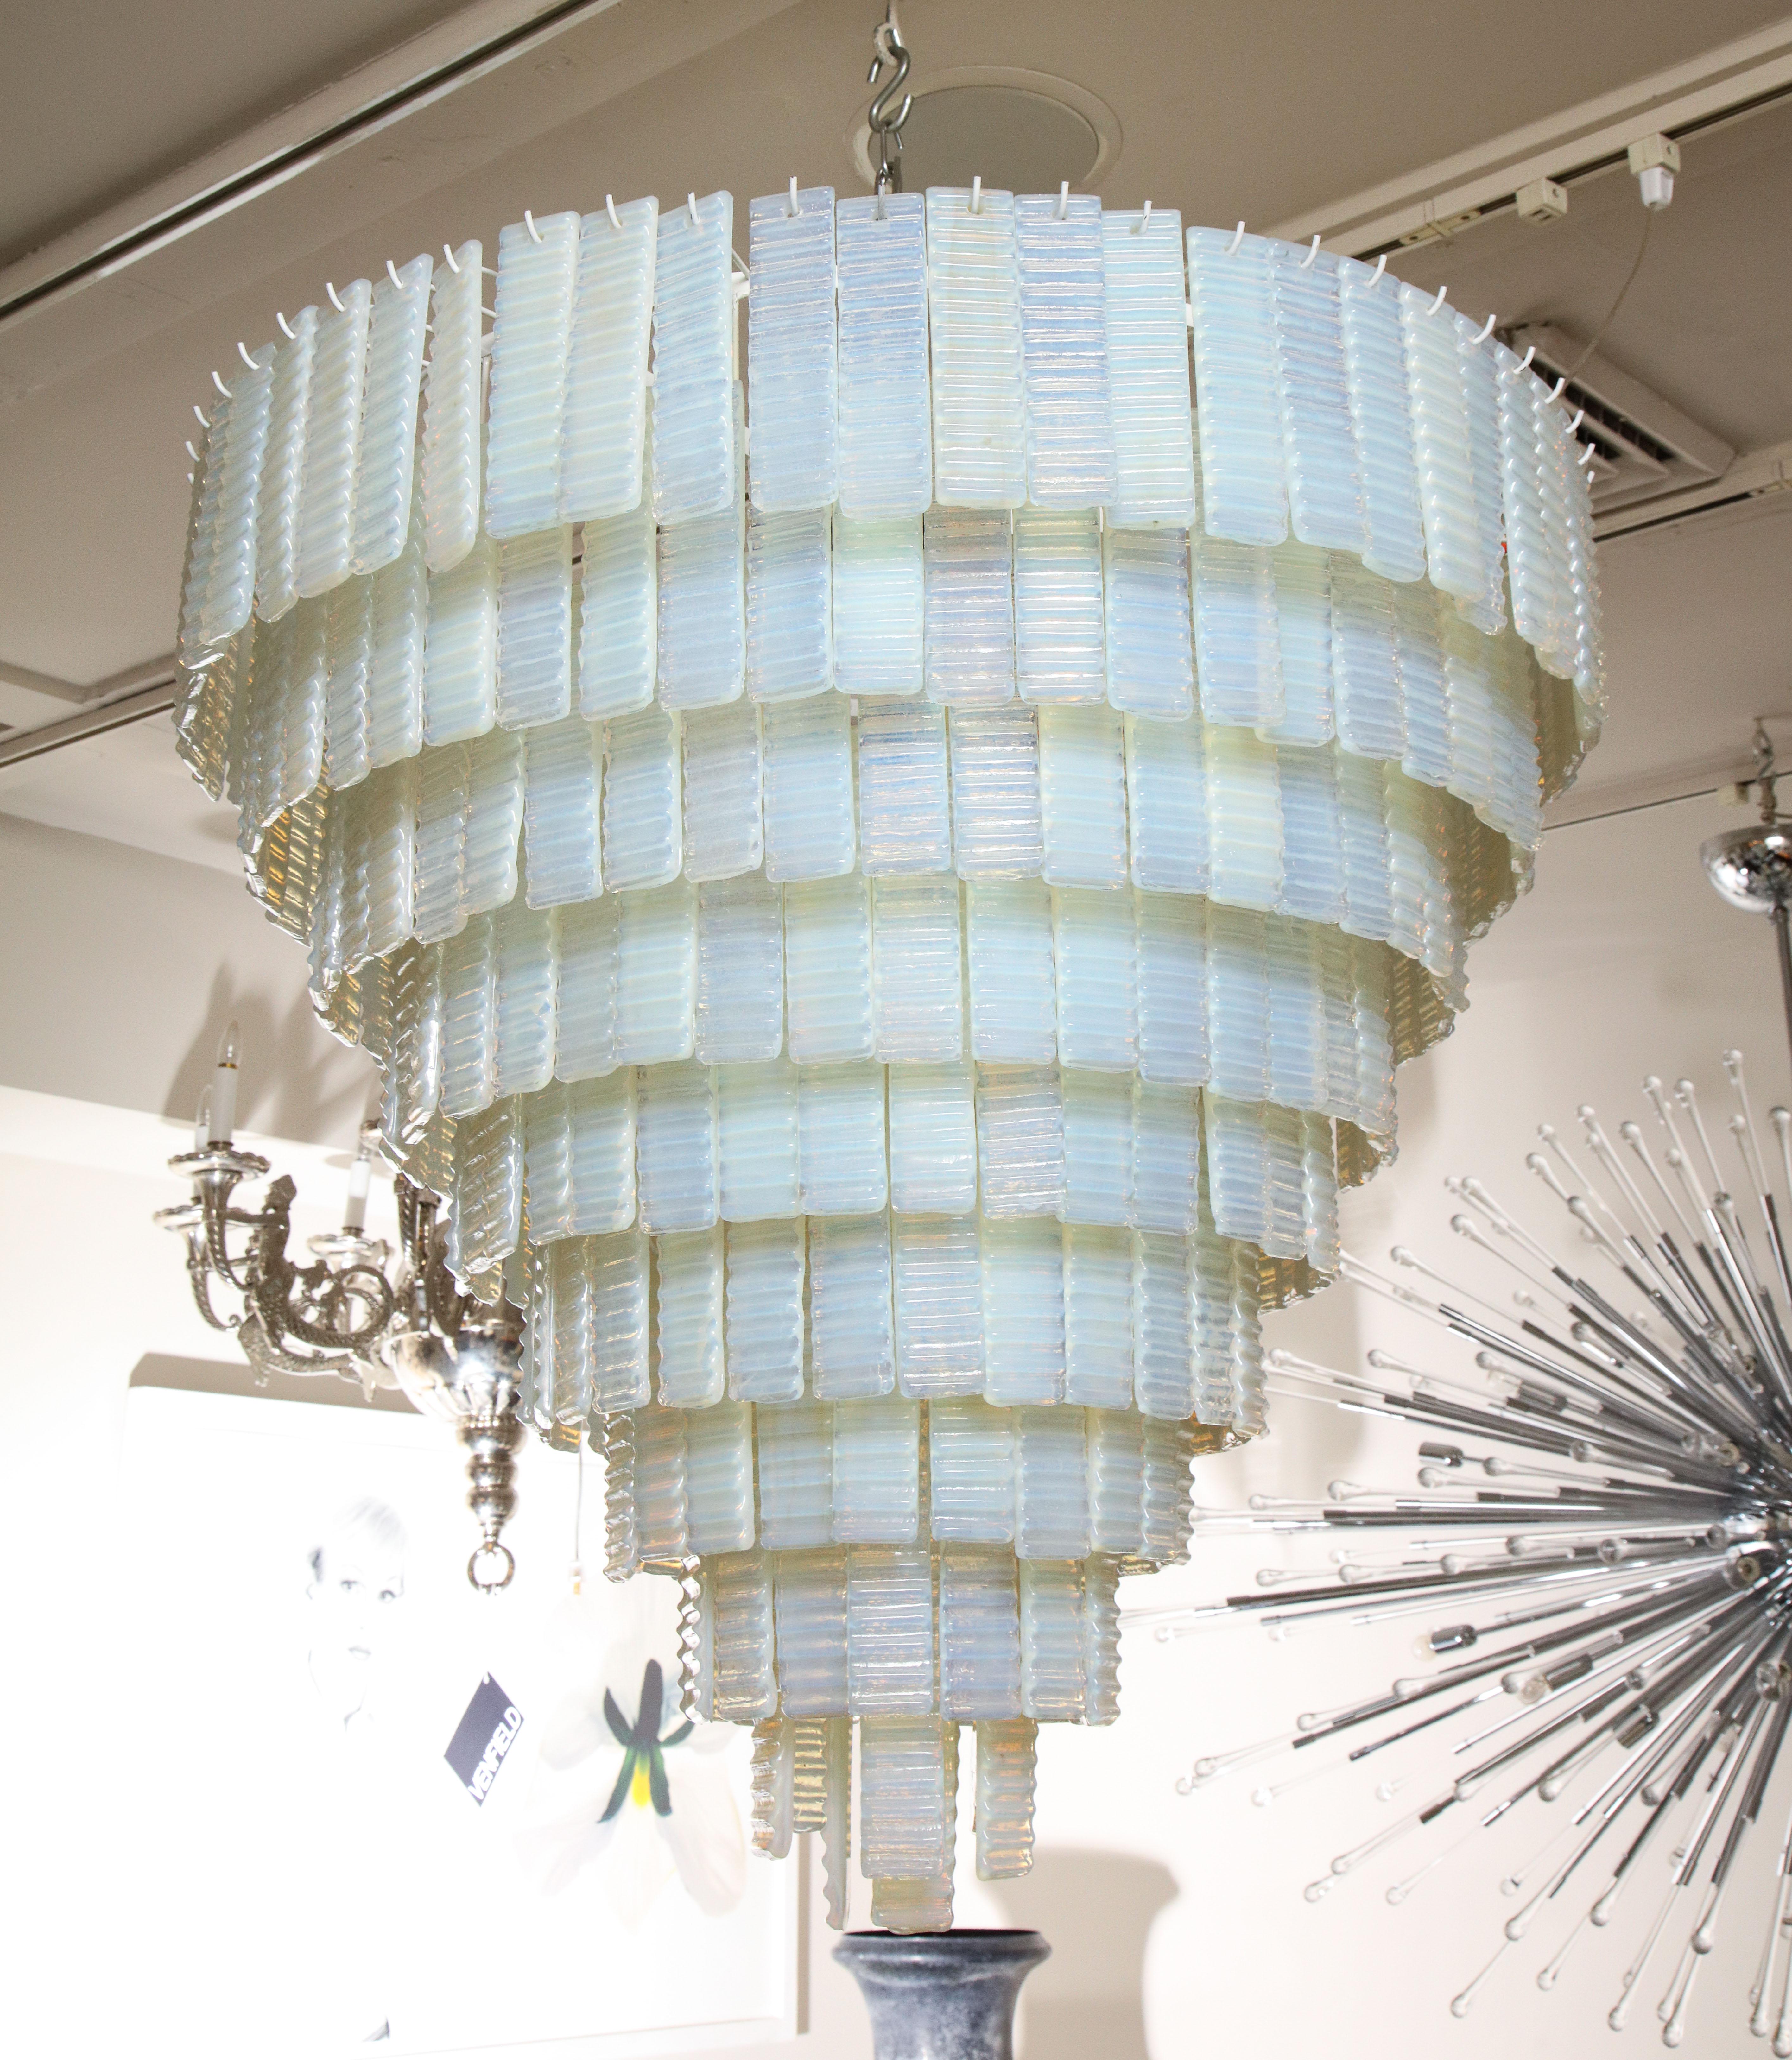 10 tiered corrugated opalescent Murano glass chandelier in a round shape available for immediate purchase. Custom orders are also available for different sizes, shapes, finishes and glass colors. Please specify your preference of pole or chain for a